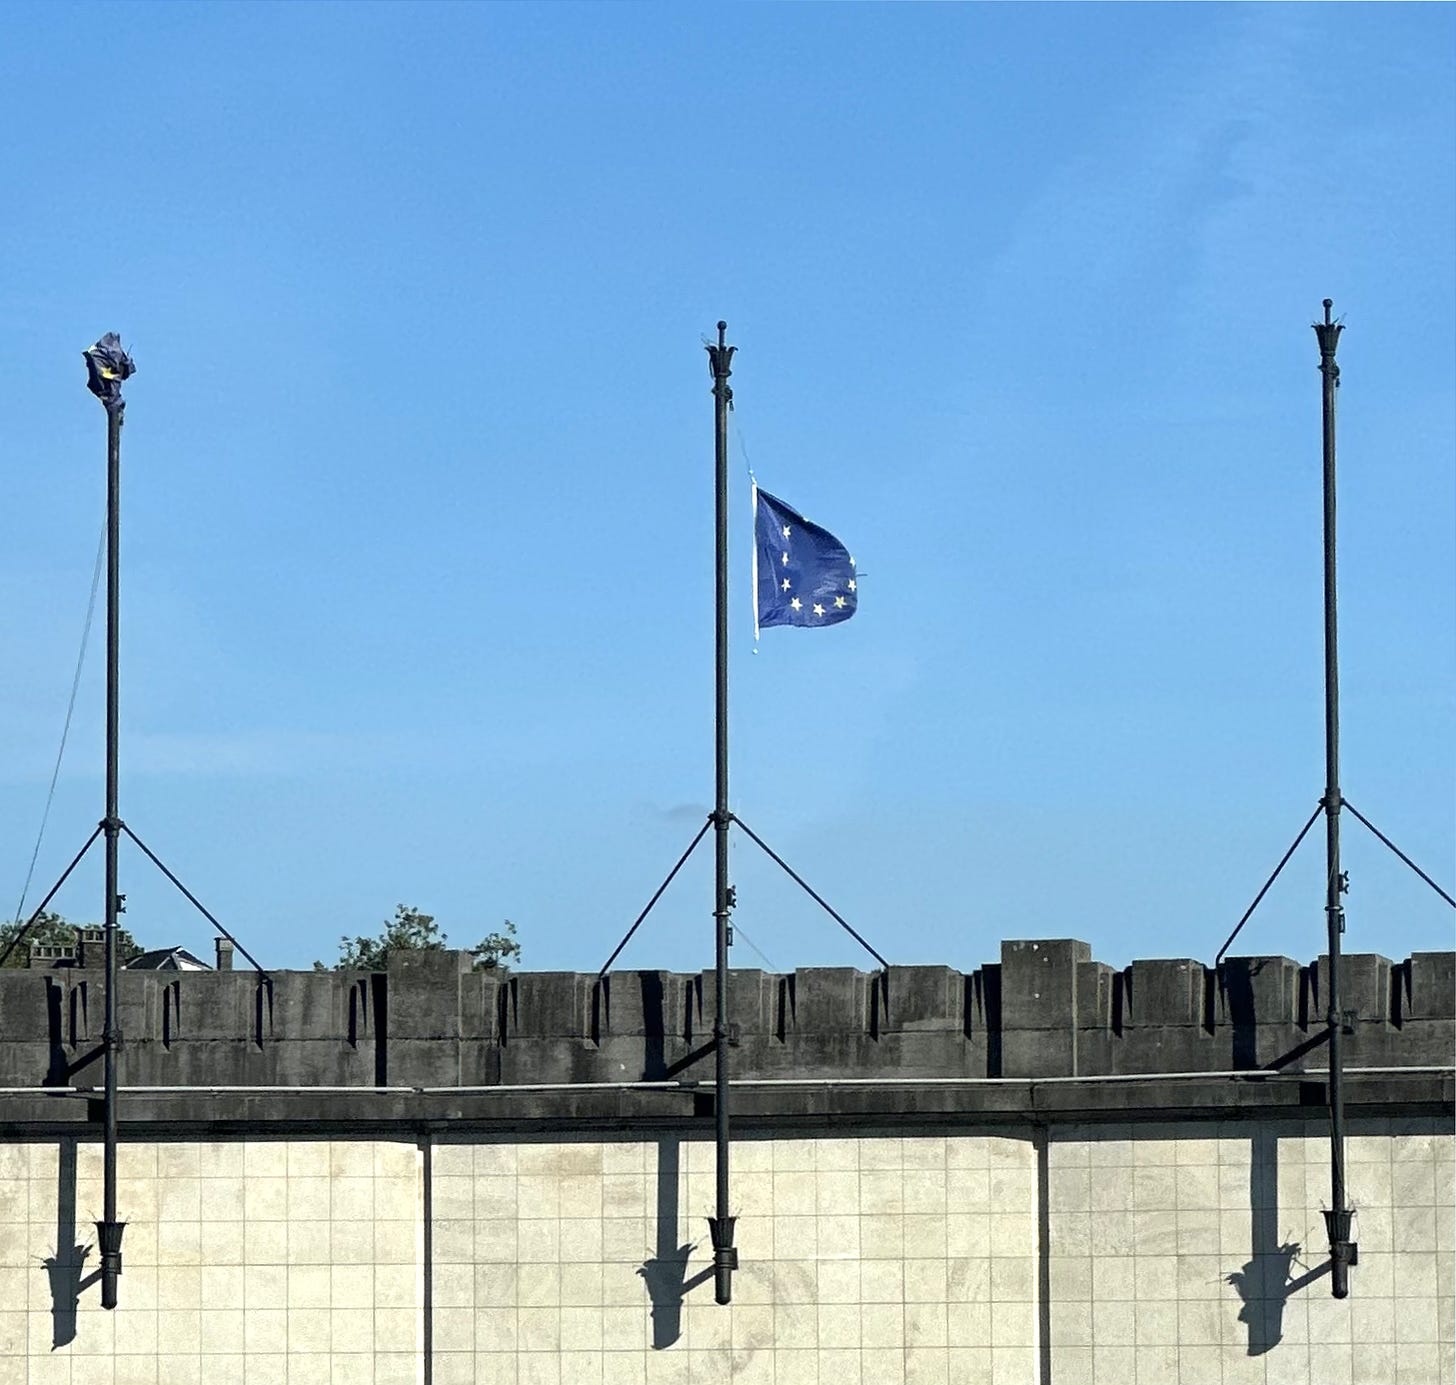 An EU flag flies atop a building with two other flagpoles beside it.